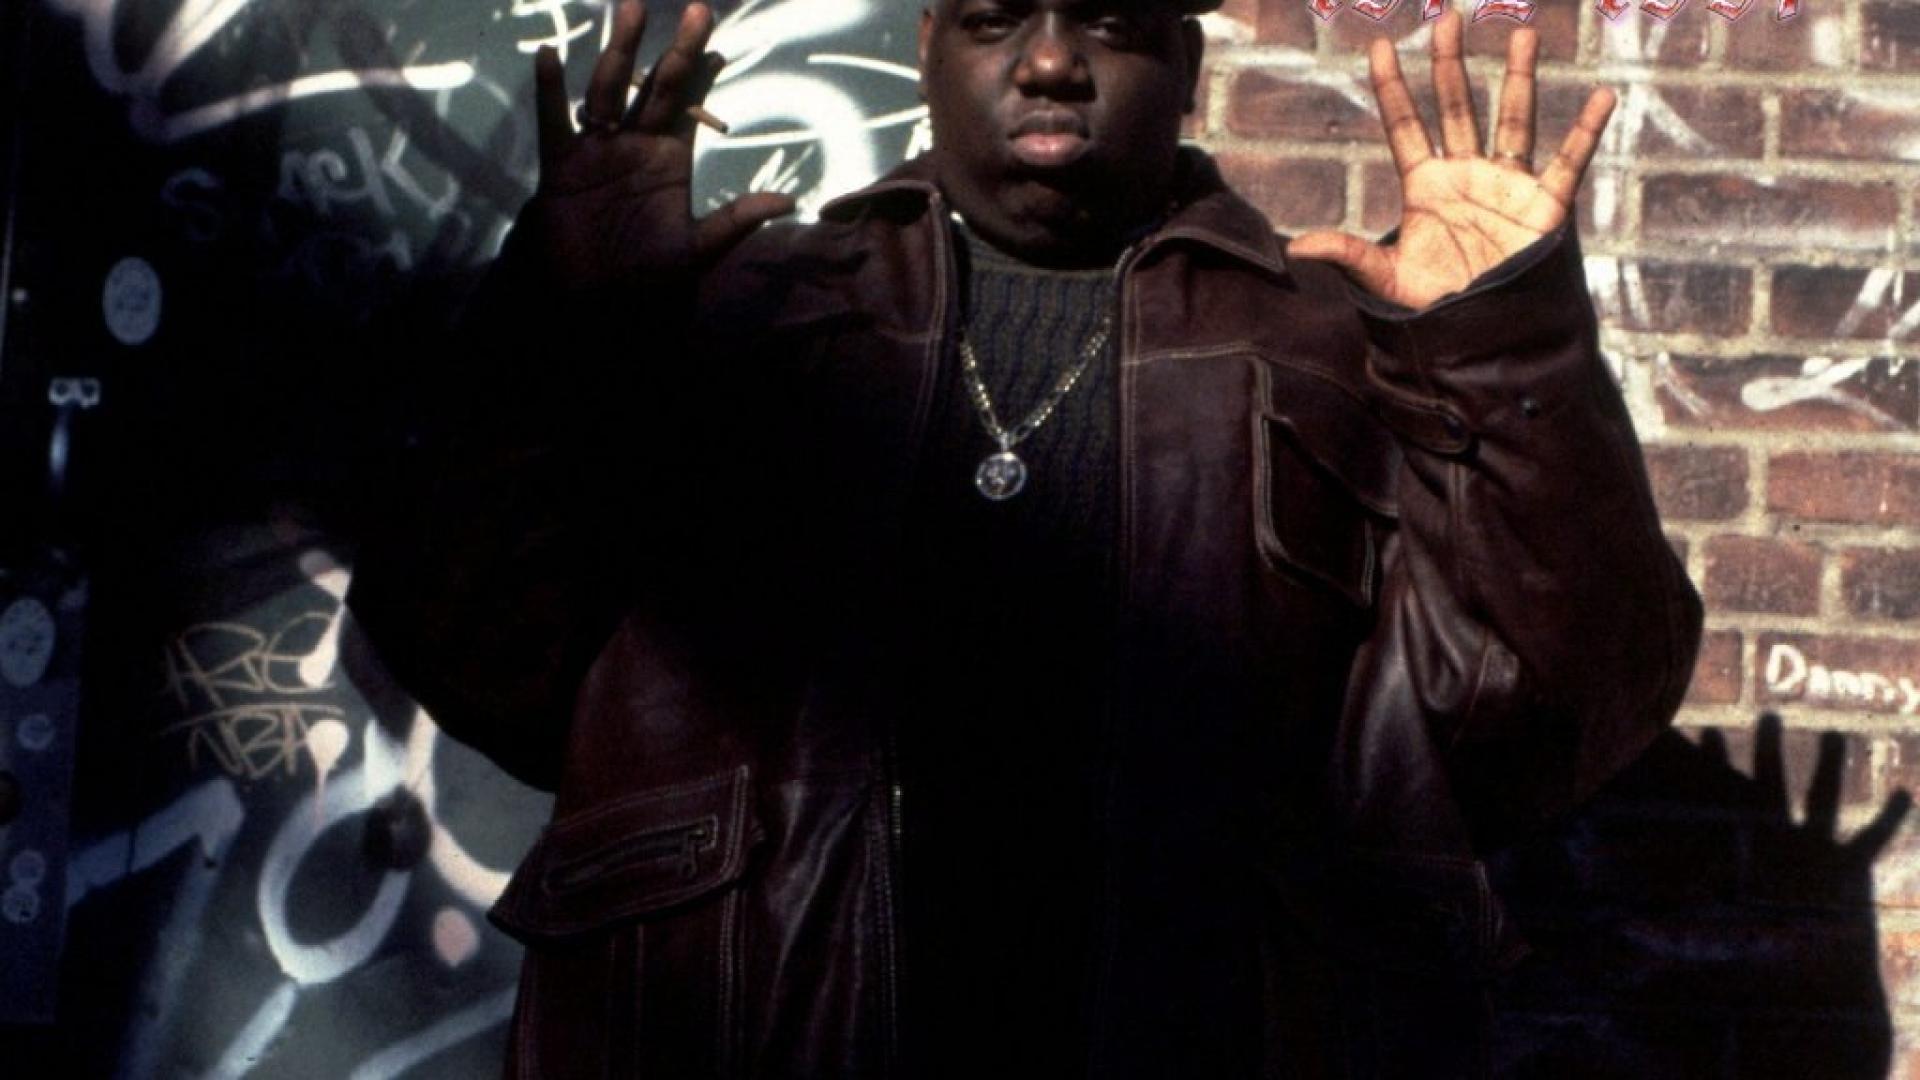 Notorious B I G Wallpaper Image Photos Pictures Background